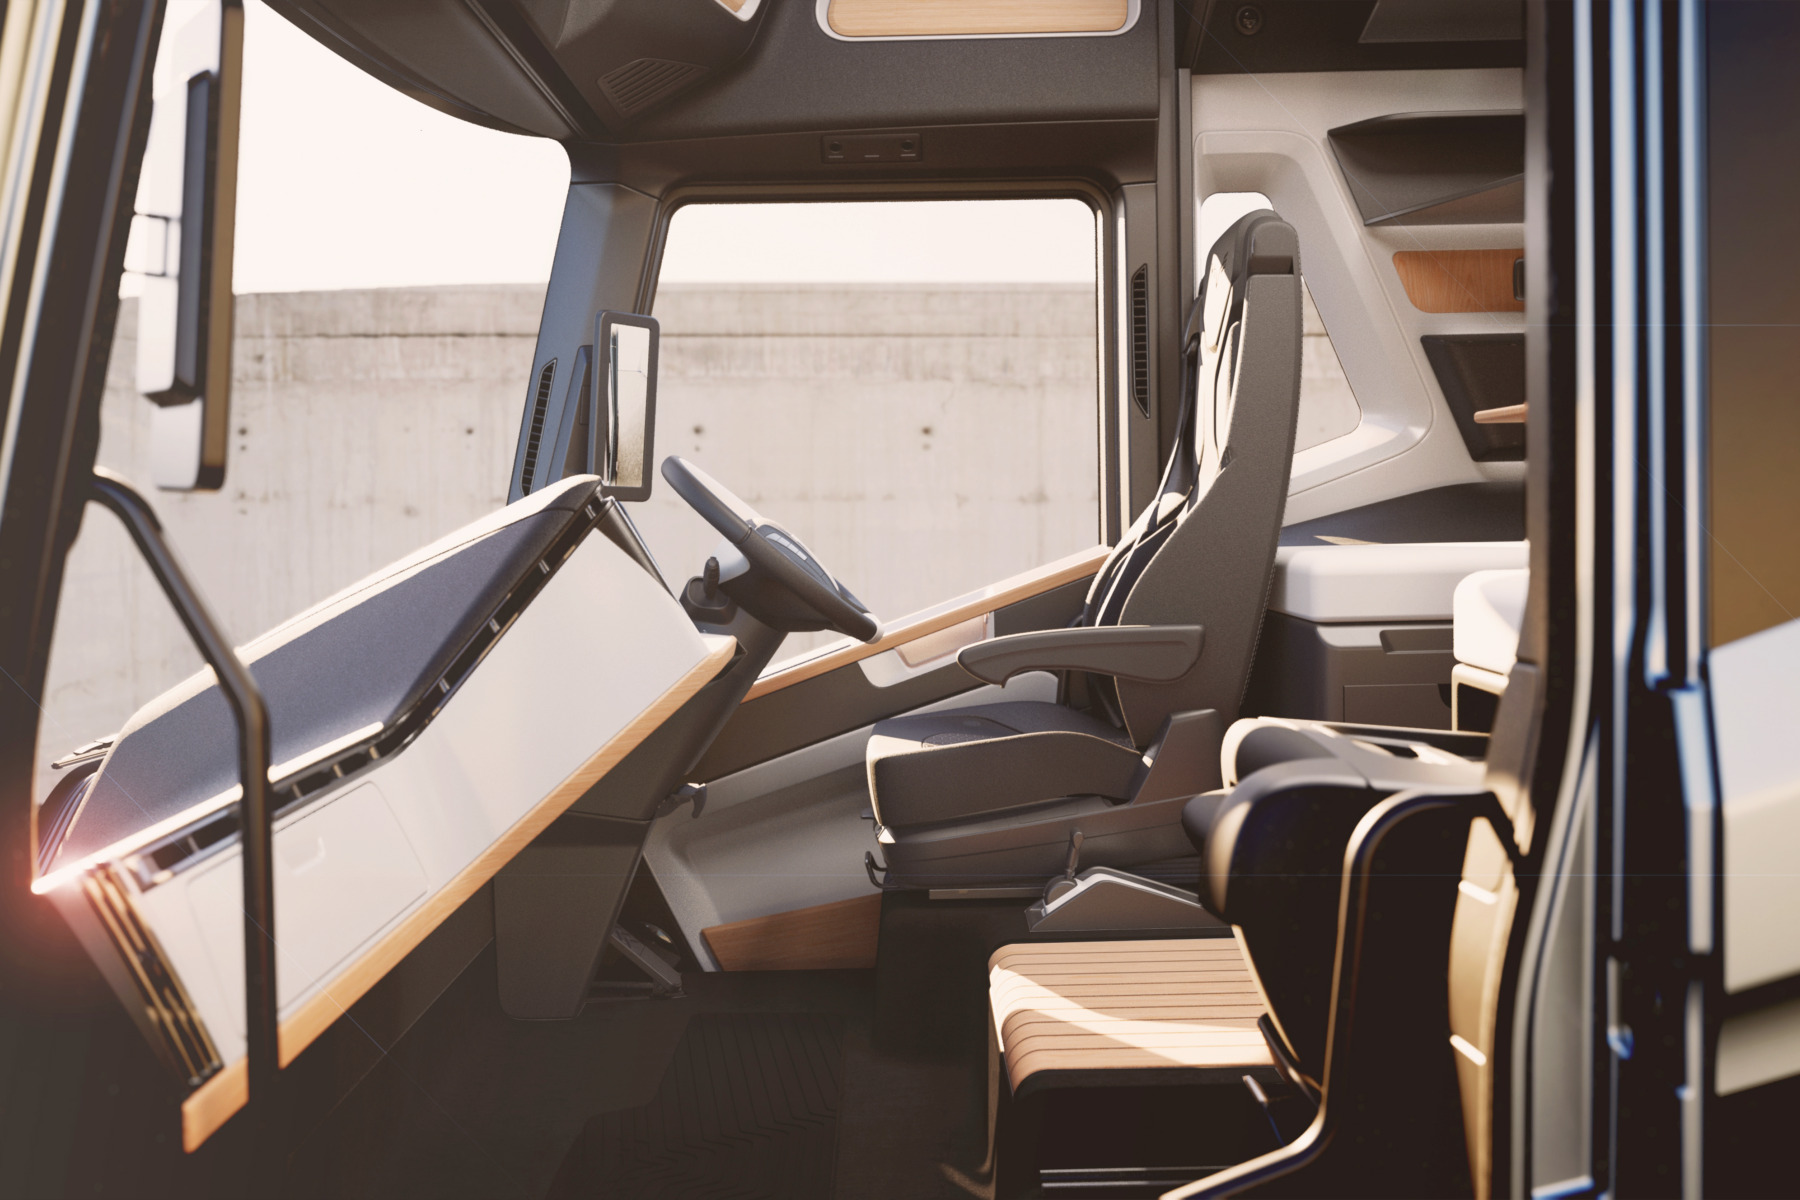 Hydrogen Vehicles Systems Heavy Goods Vehicle interior 1